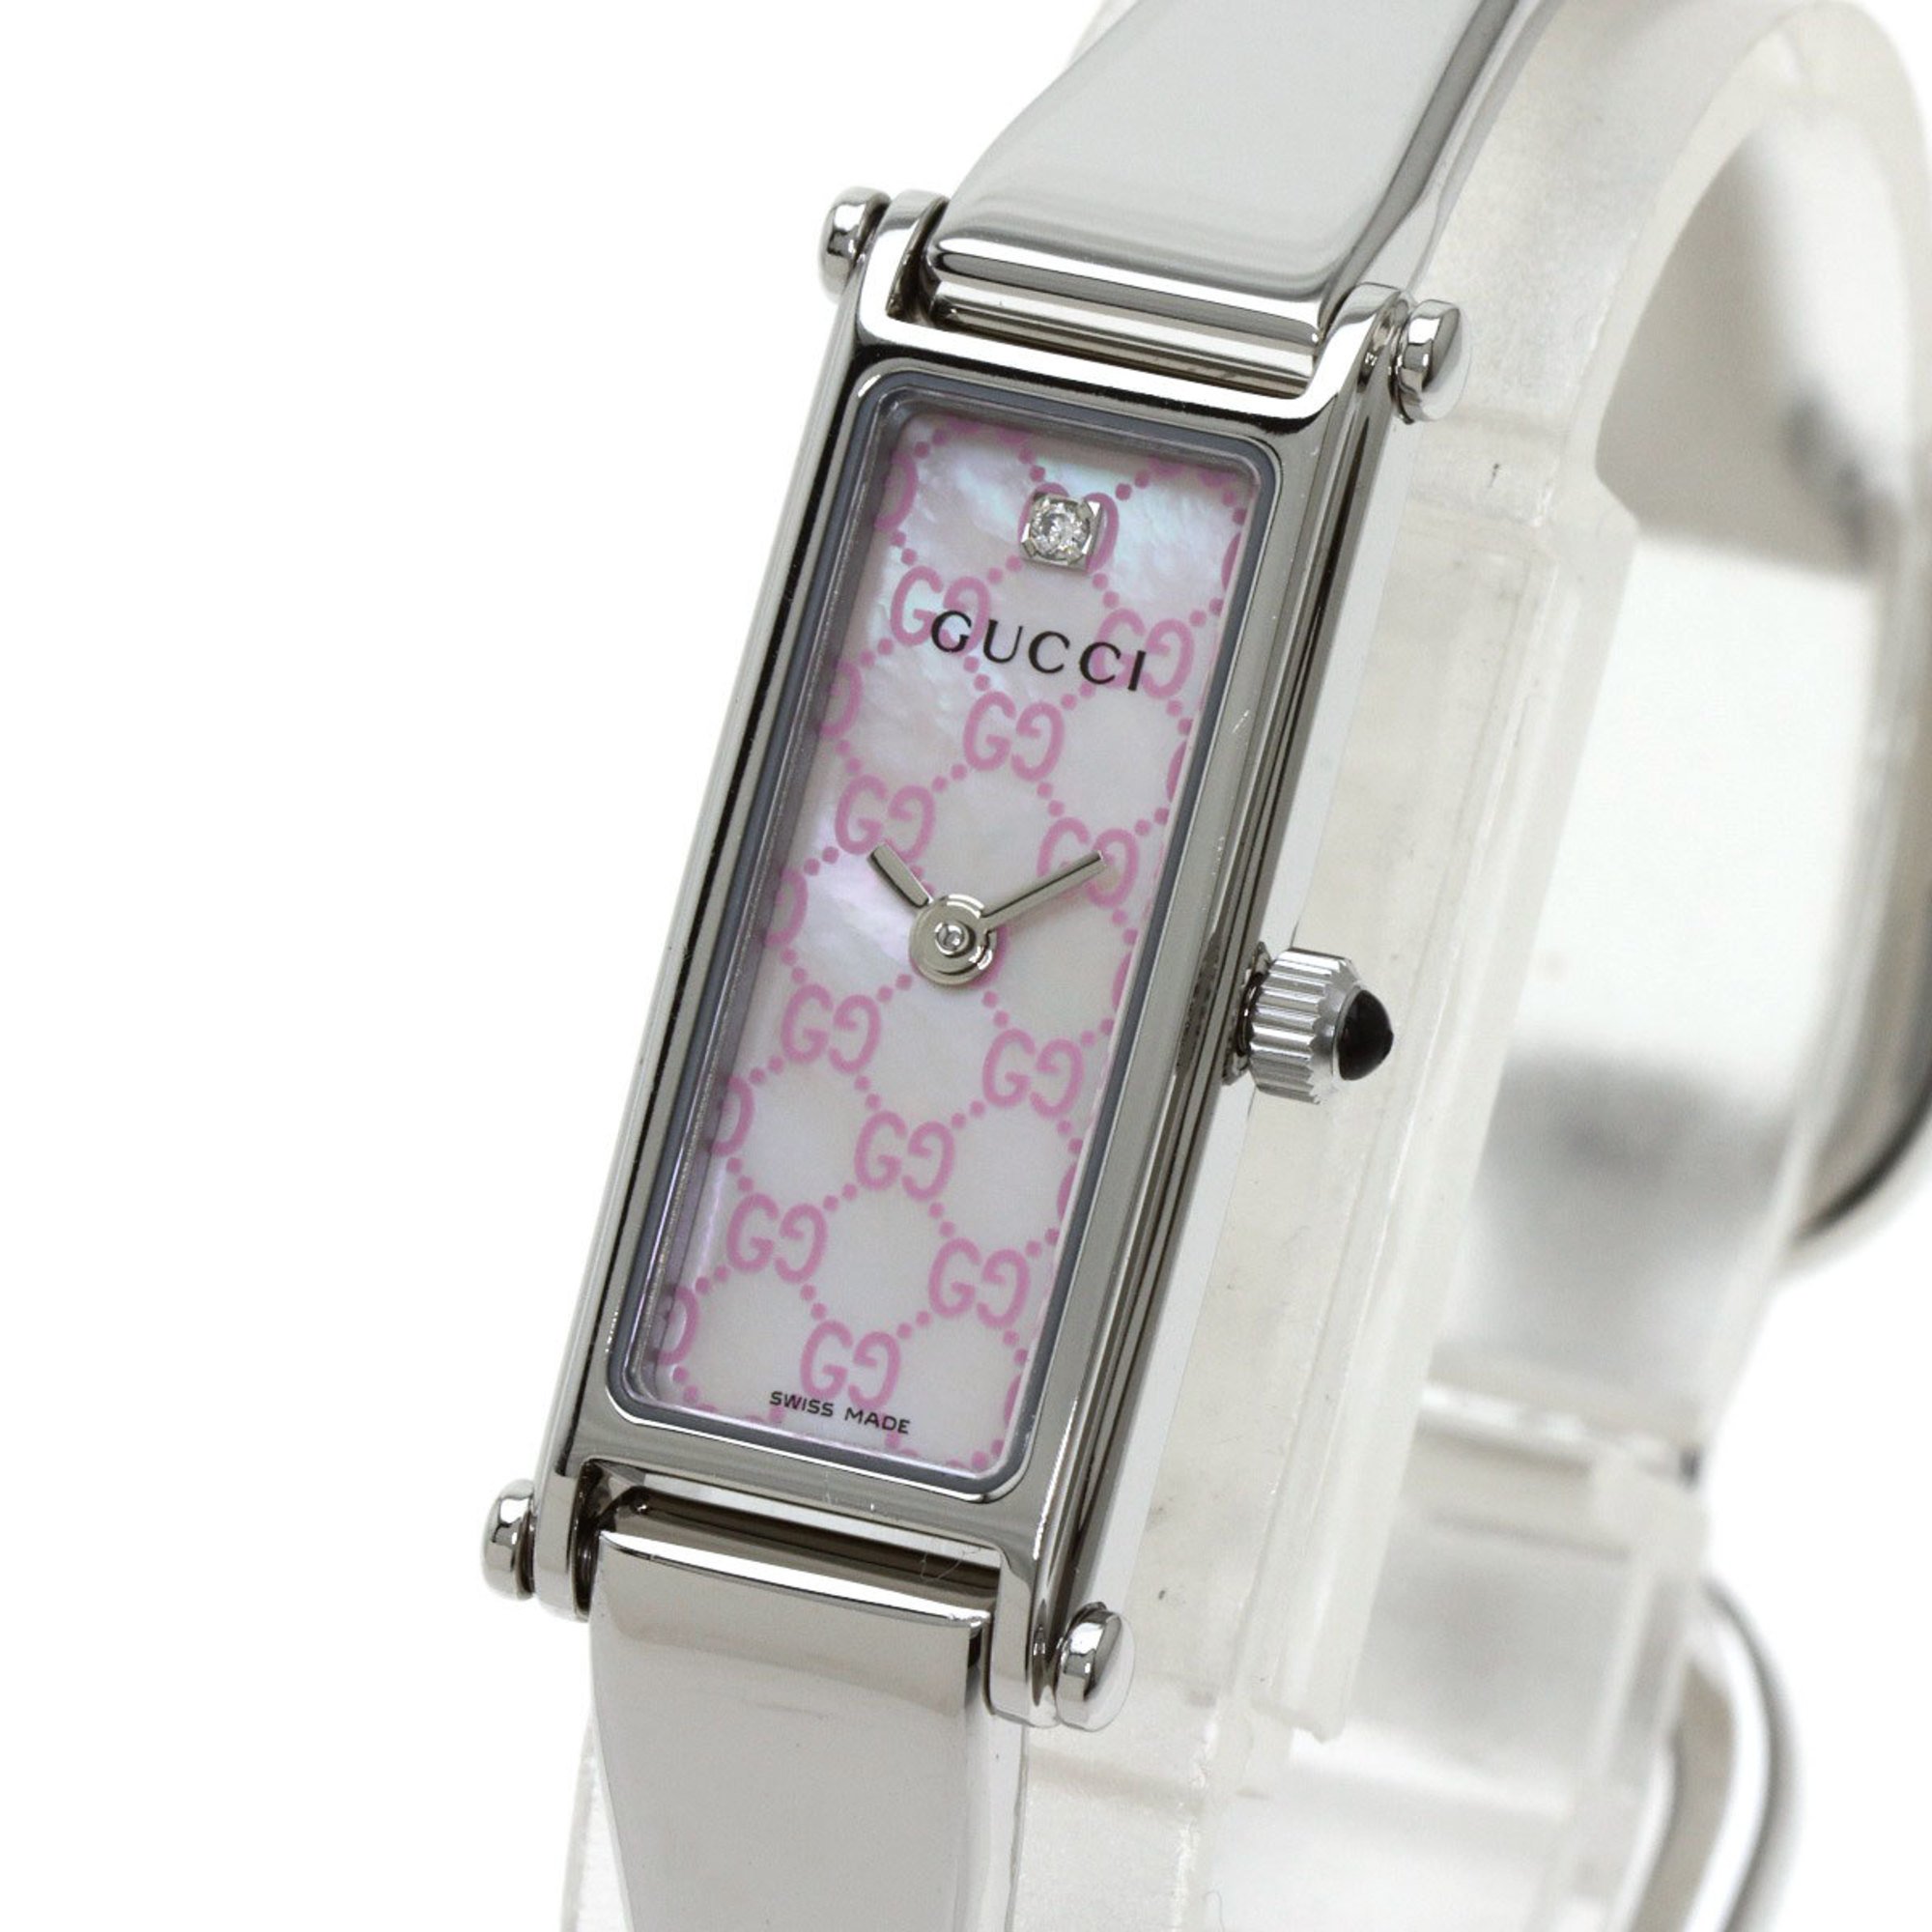 Gucci 1500L Square Face 1P Diamond Watch Stainless Steel/SS Women's